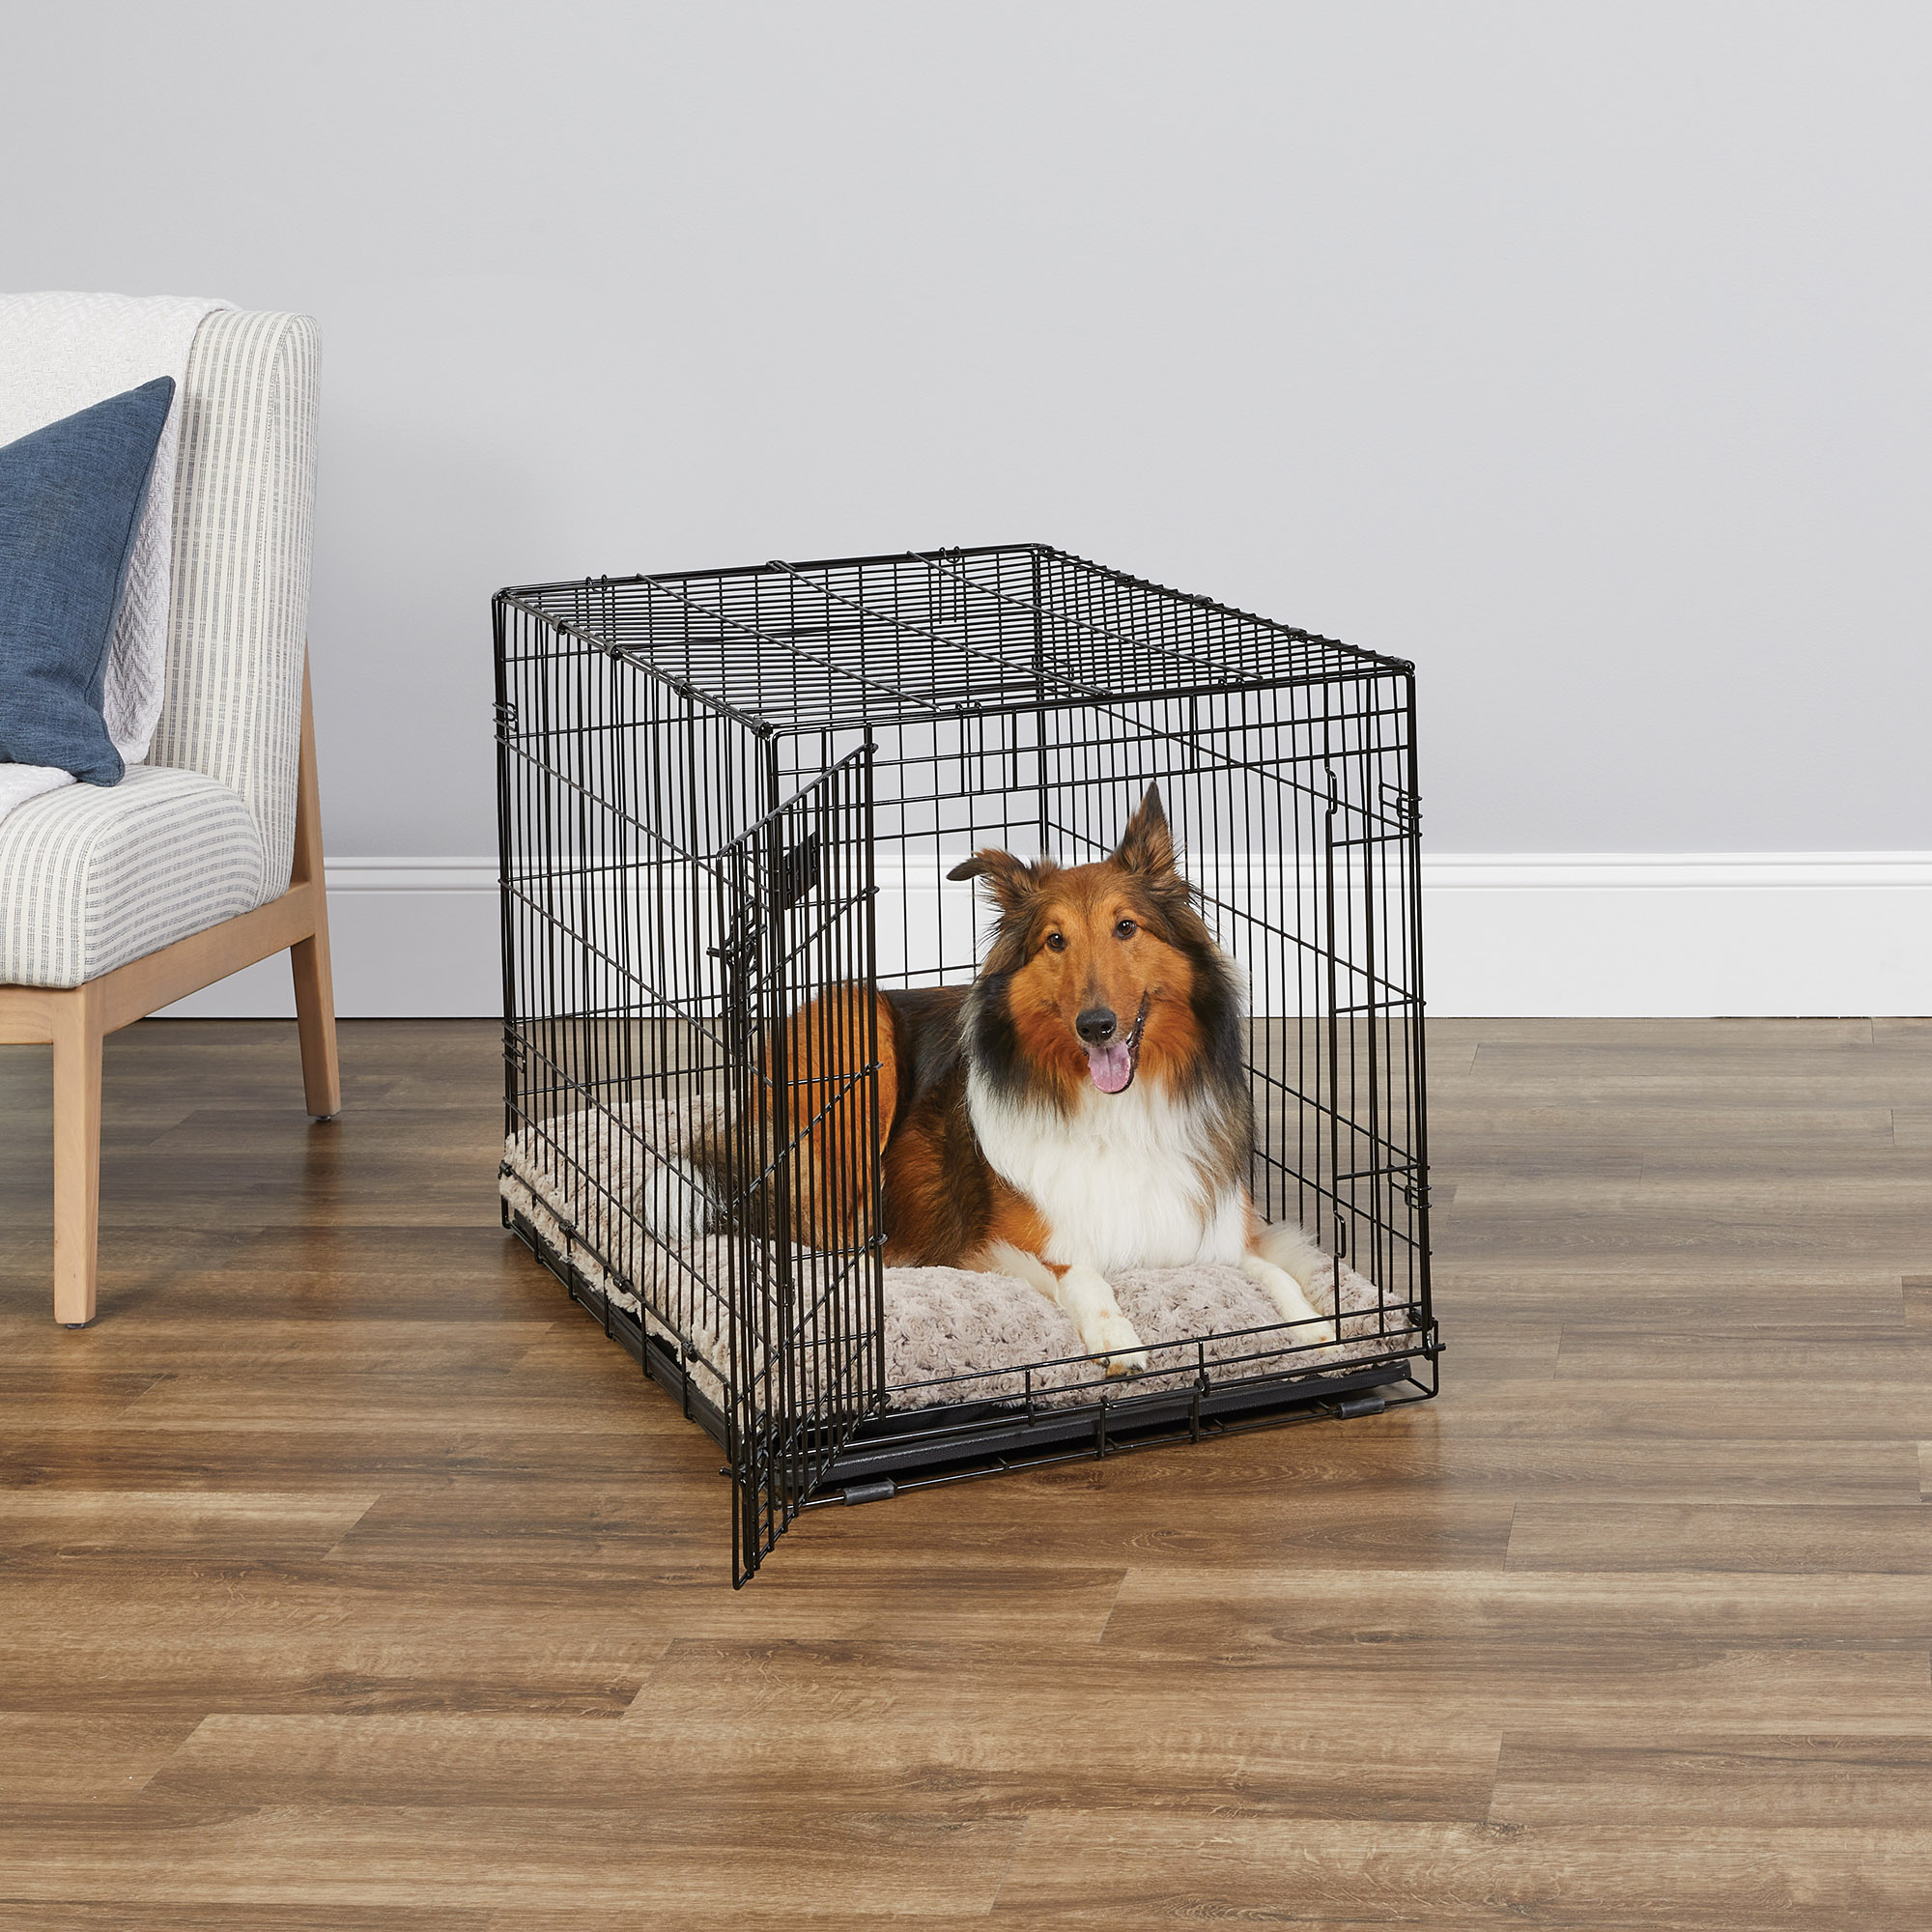 MidWest Homes for Pets Newly Enhanced Single Door iCrate Dog Crate, Includes Leak-Proof Pan, Floor Protecting Feet, Divider Panel & New Patented, 36 Inch - image 1 of 9